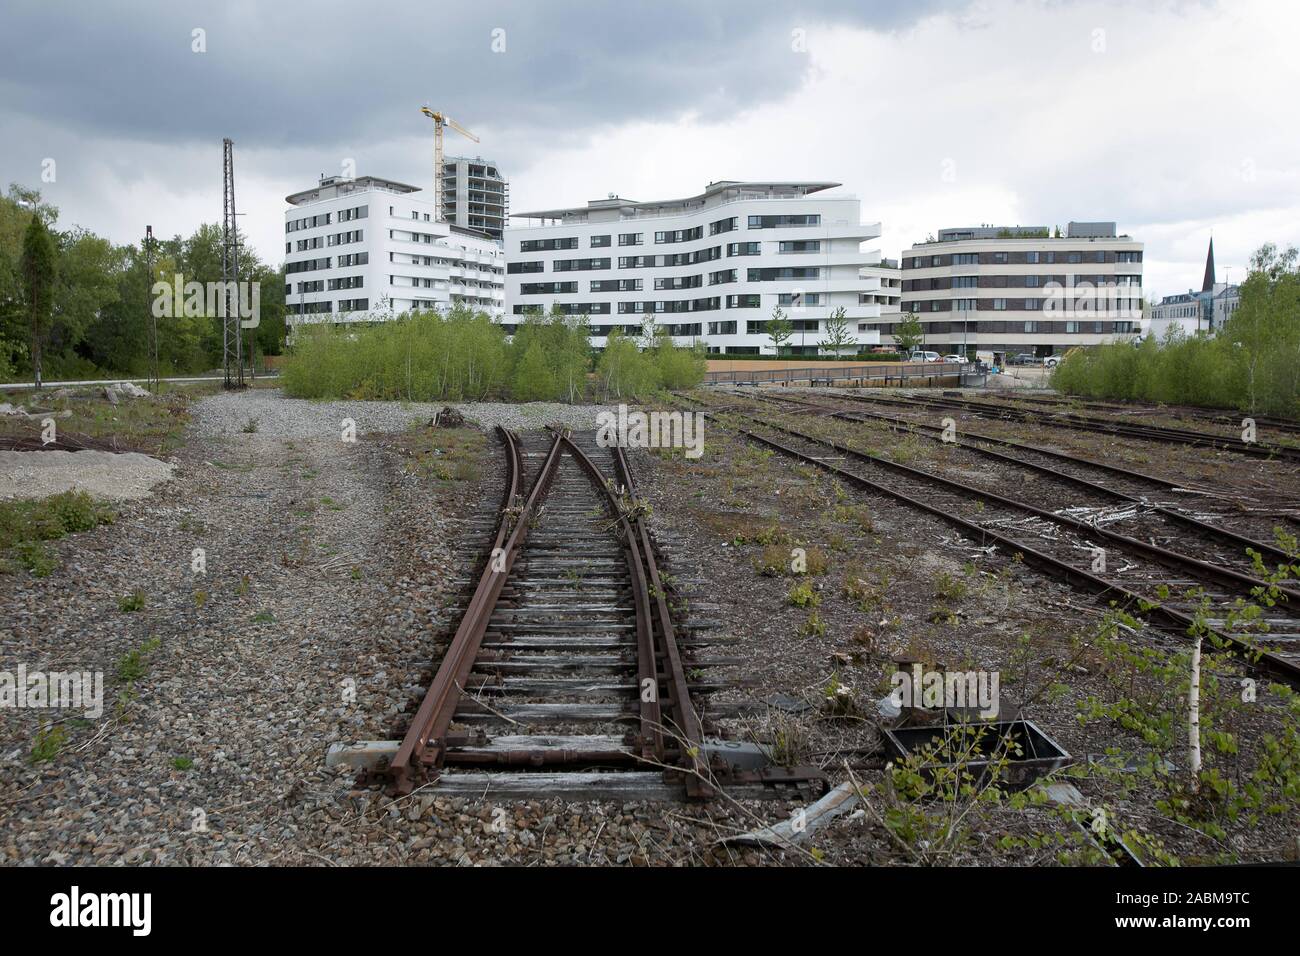 View of the new residential buildings in the Baumkirchen Mitte Landscape Park in Munich from disused tracks. [automated translation] Stock Photo